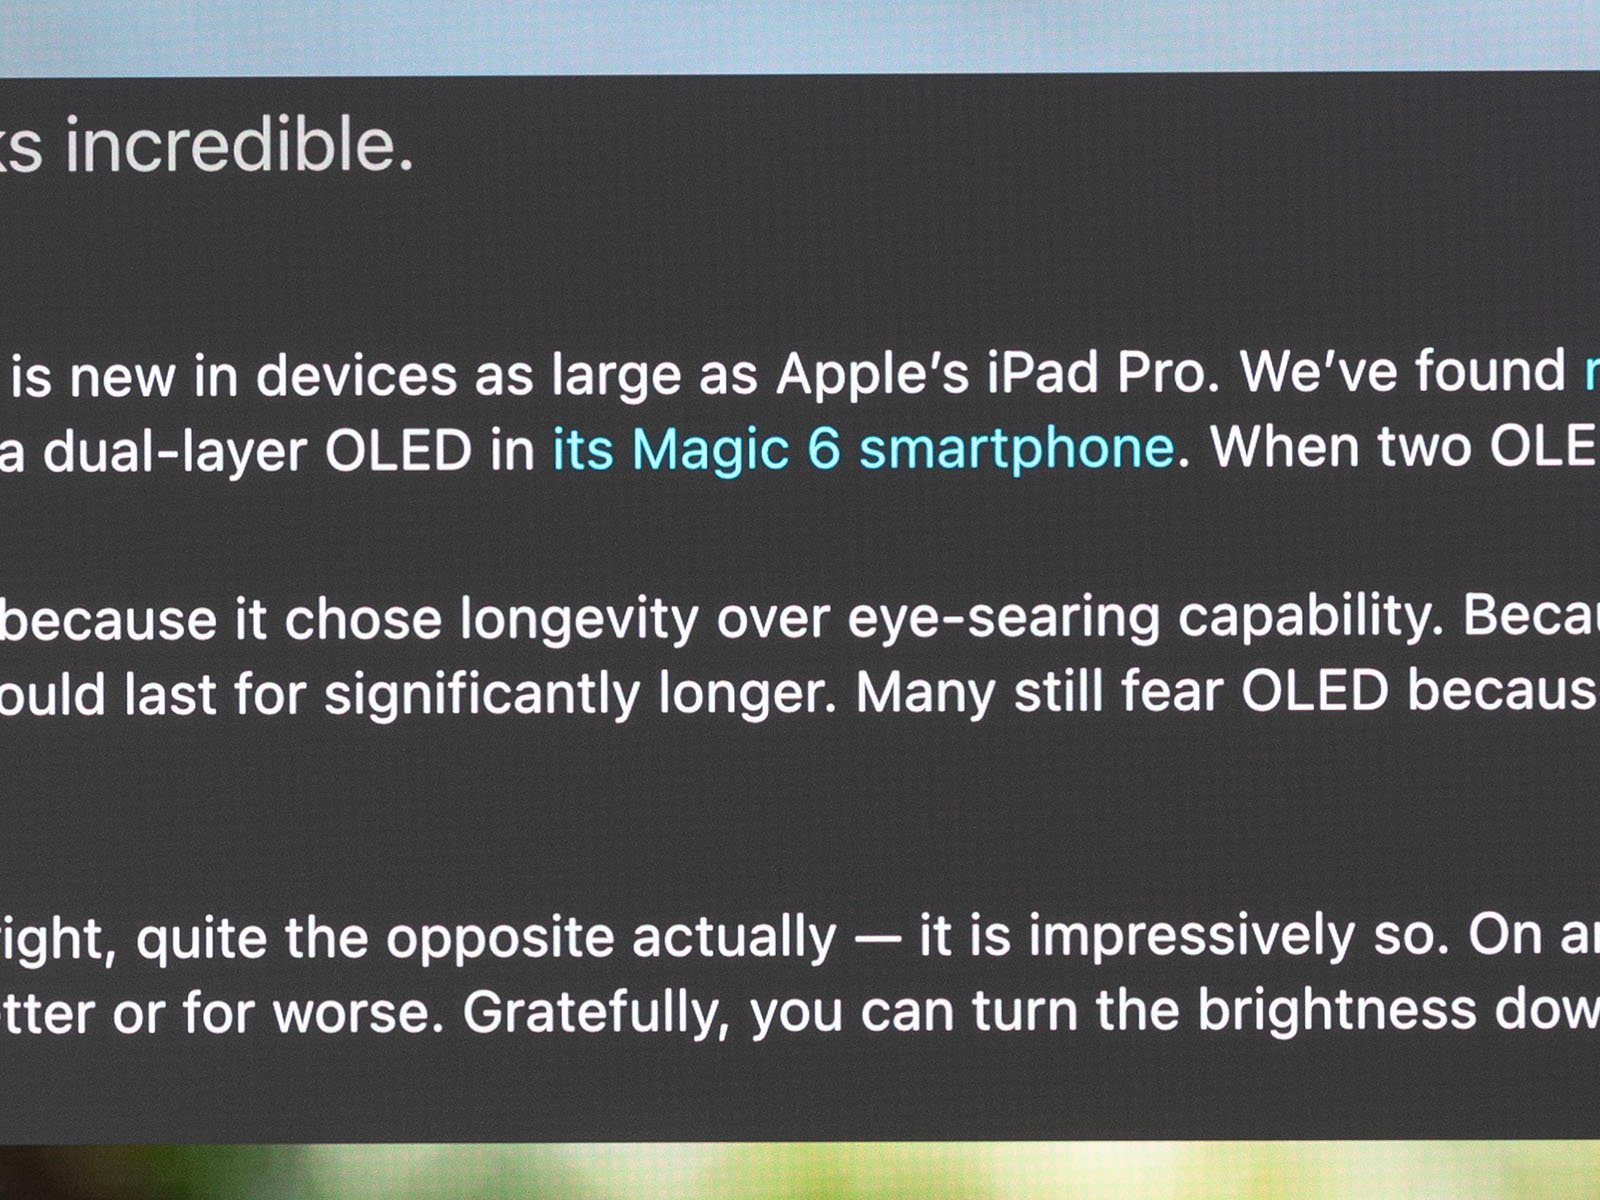 A partial screenshot of text discussing Apple's iPad Pro and a Magic 6 smartphone. The text mentions OLED technology, eye-searing capability, and display brightness, while highlighting longevity and the ability to adjust brightness.